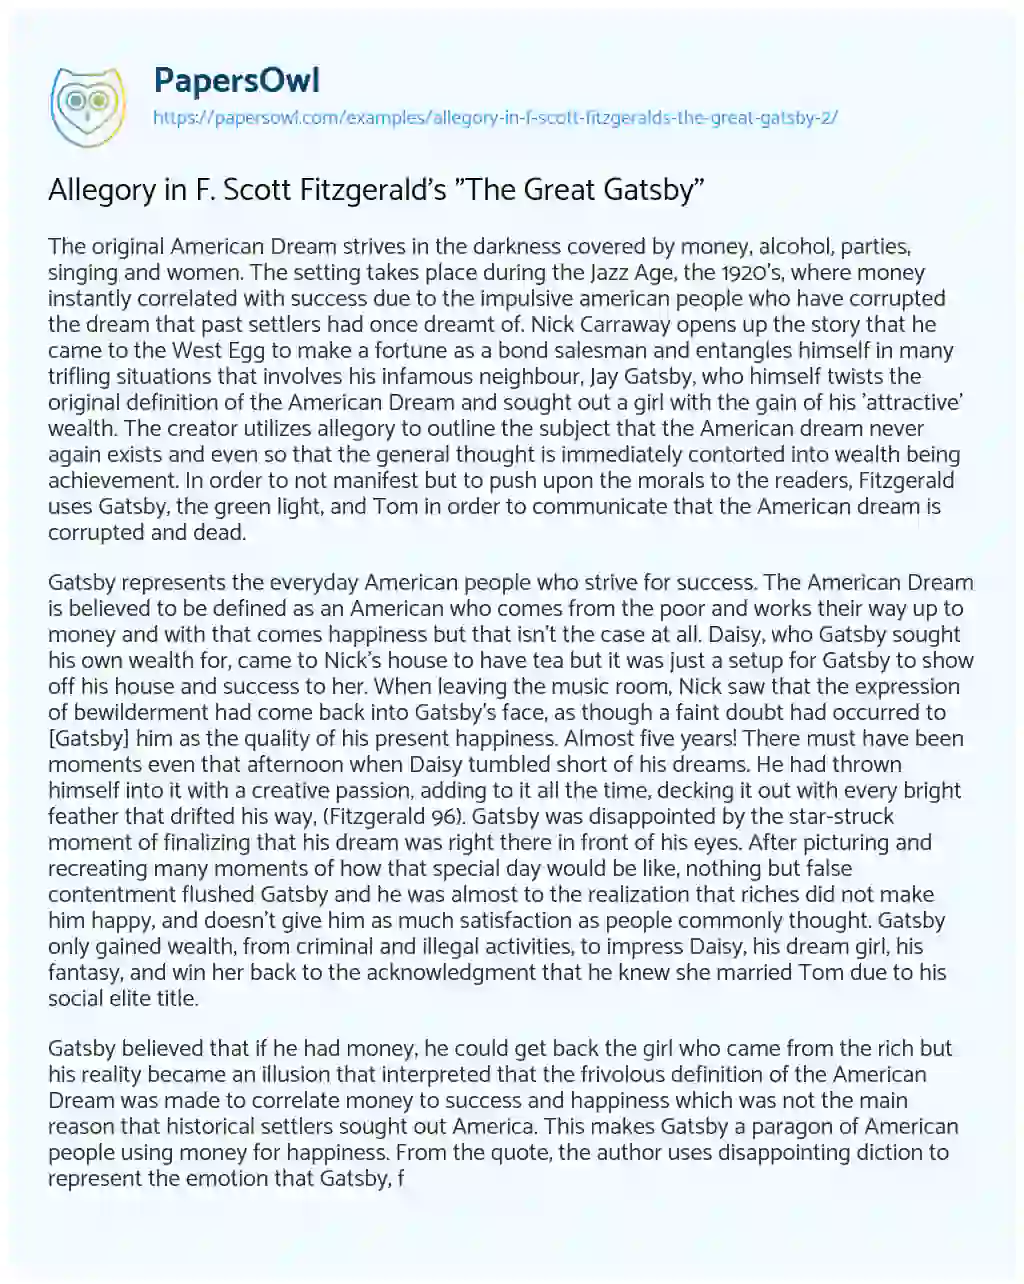 Allegory in F. Scott Fitzgerald’s “The Great Gatsby” essay